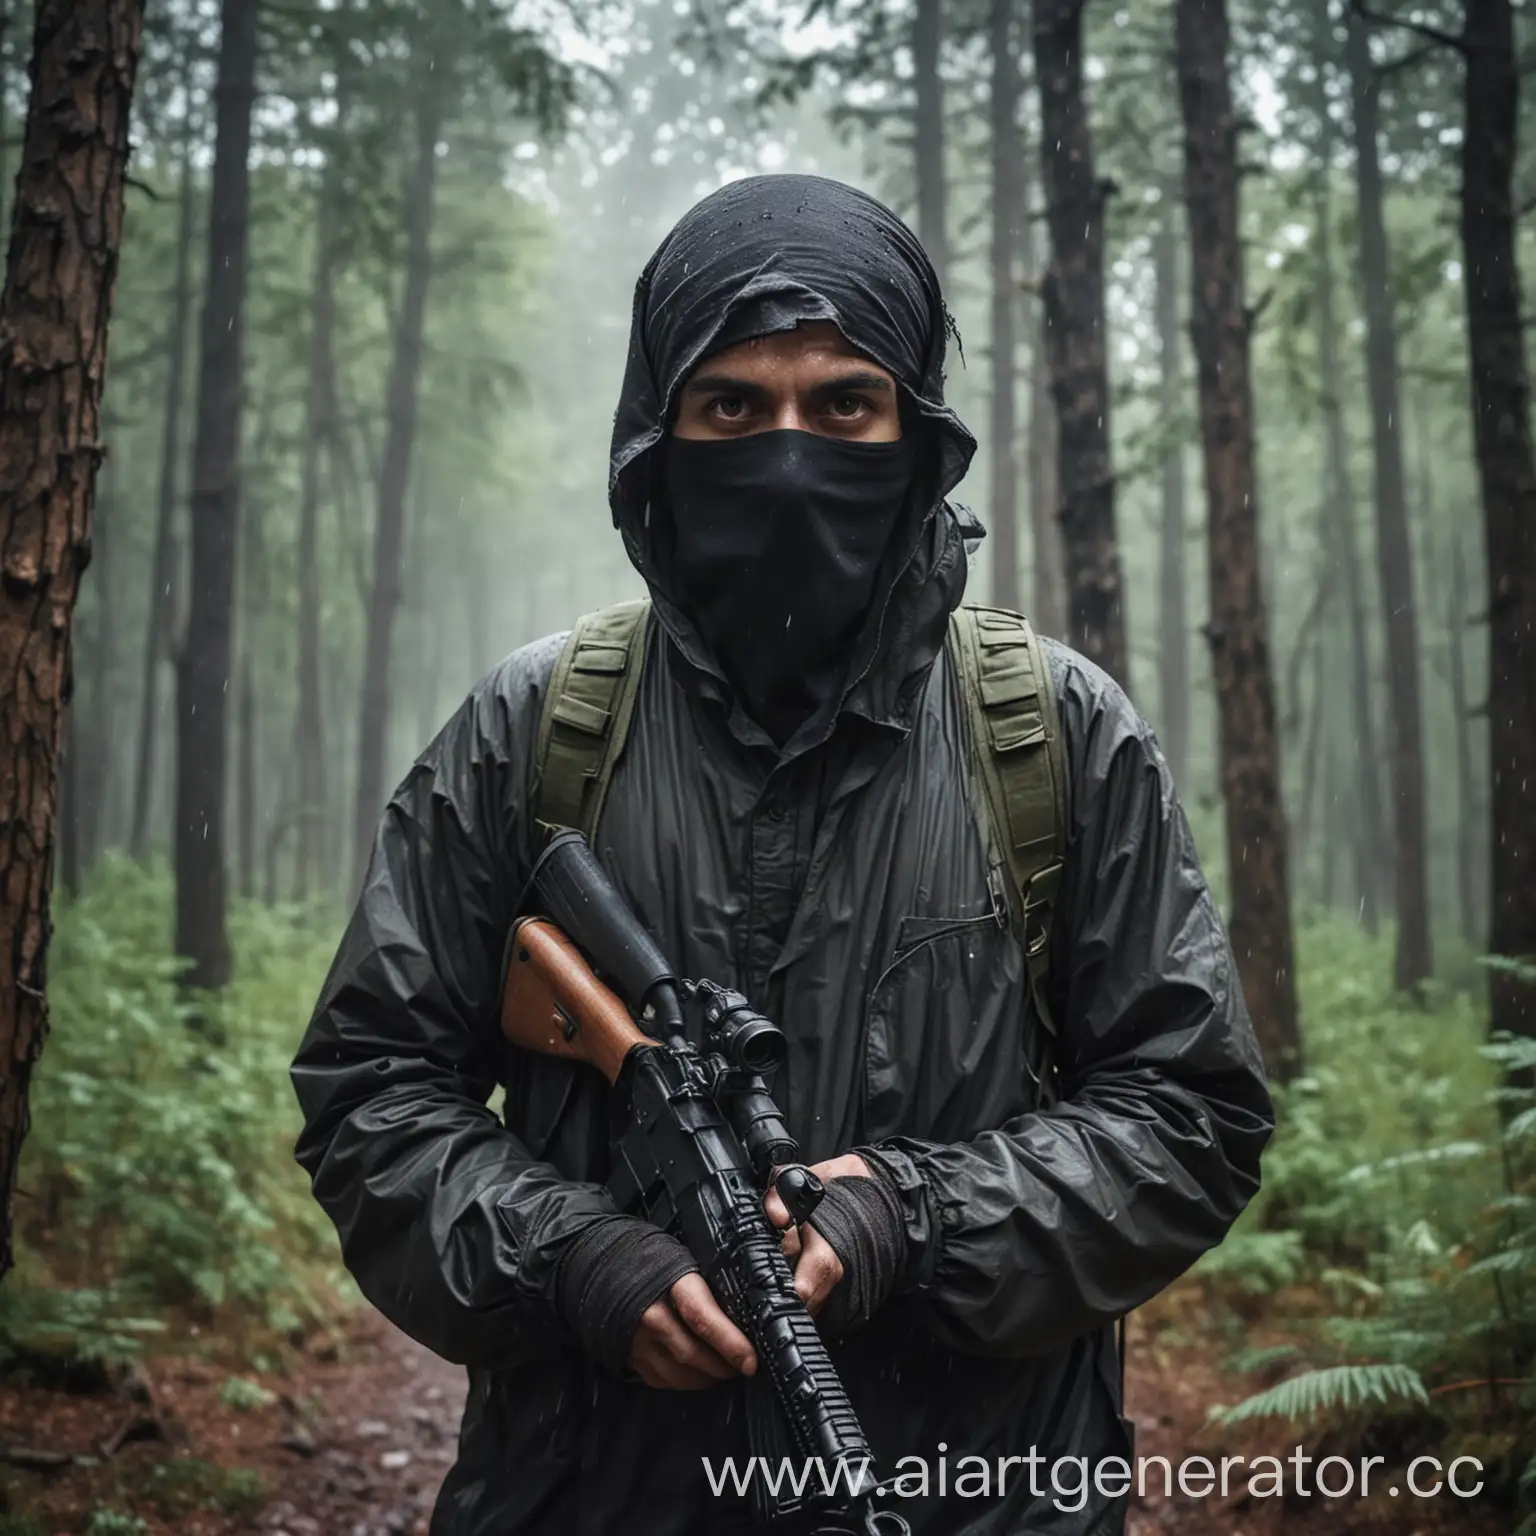 Intense-Scene-Terrorist-in-Forest-Confronting-Camera-in-Bad-Weather